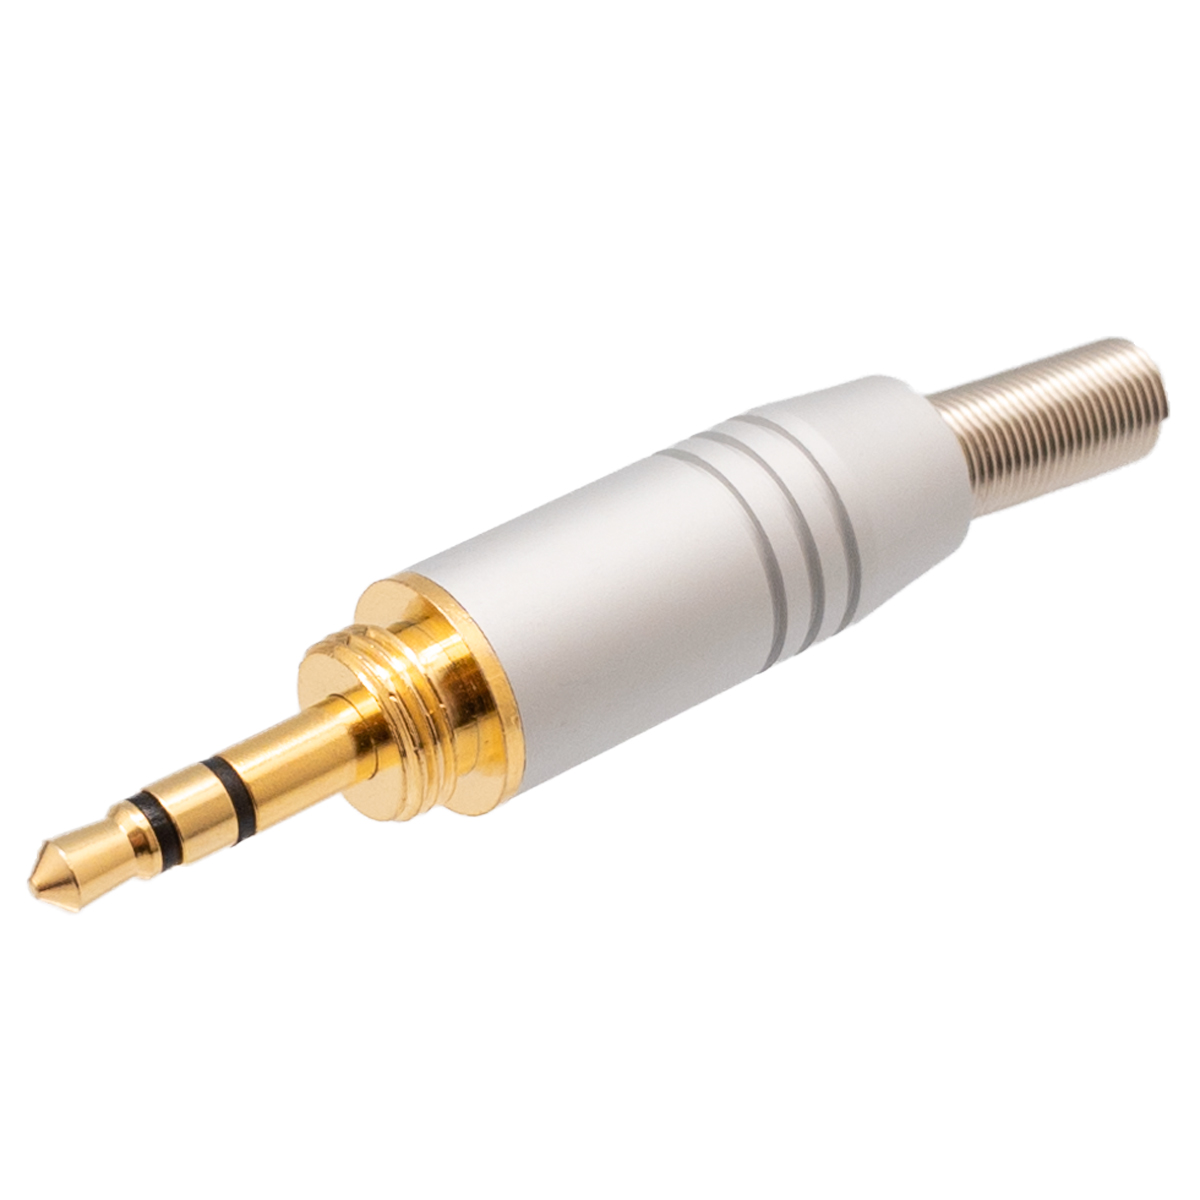 Jack 3.5mm St. Male with screw, aluminium body and spring cable problector for 6mm.